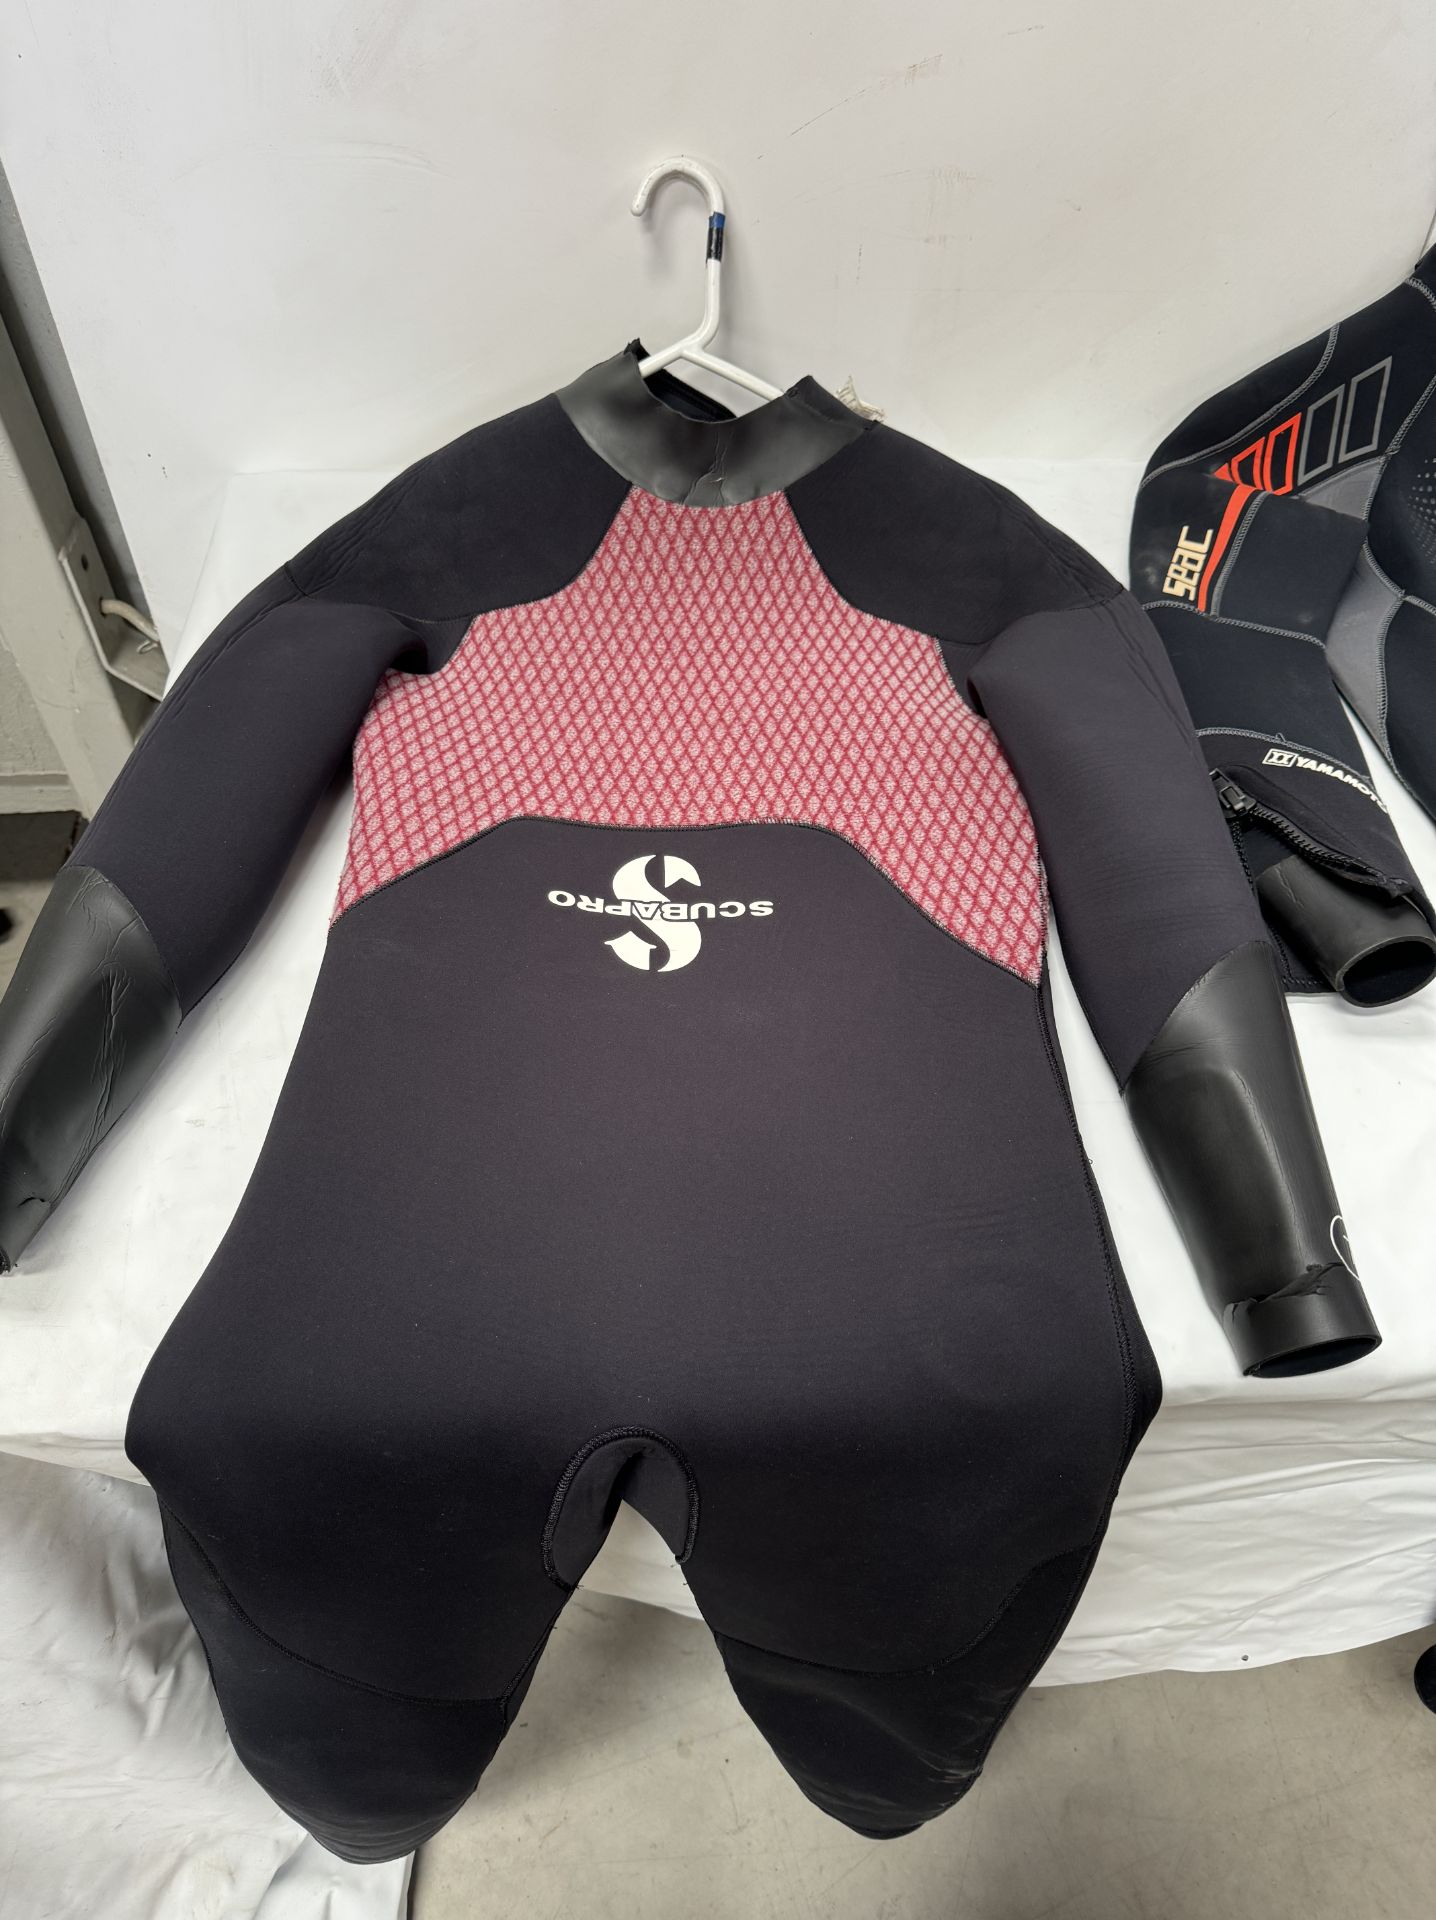 Six O’Neill, Beuchat, Seac Wetsuits (Location: Brentwood. Please Refer to General Notes) - Image 12 of 18